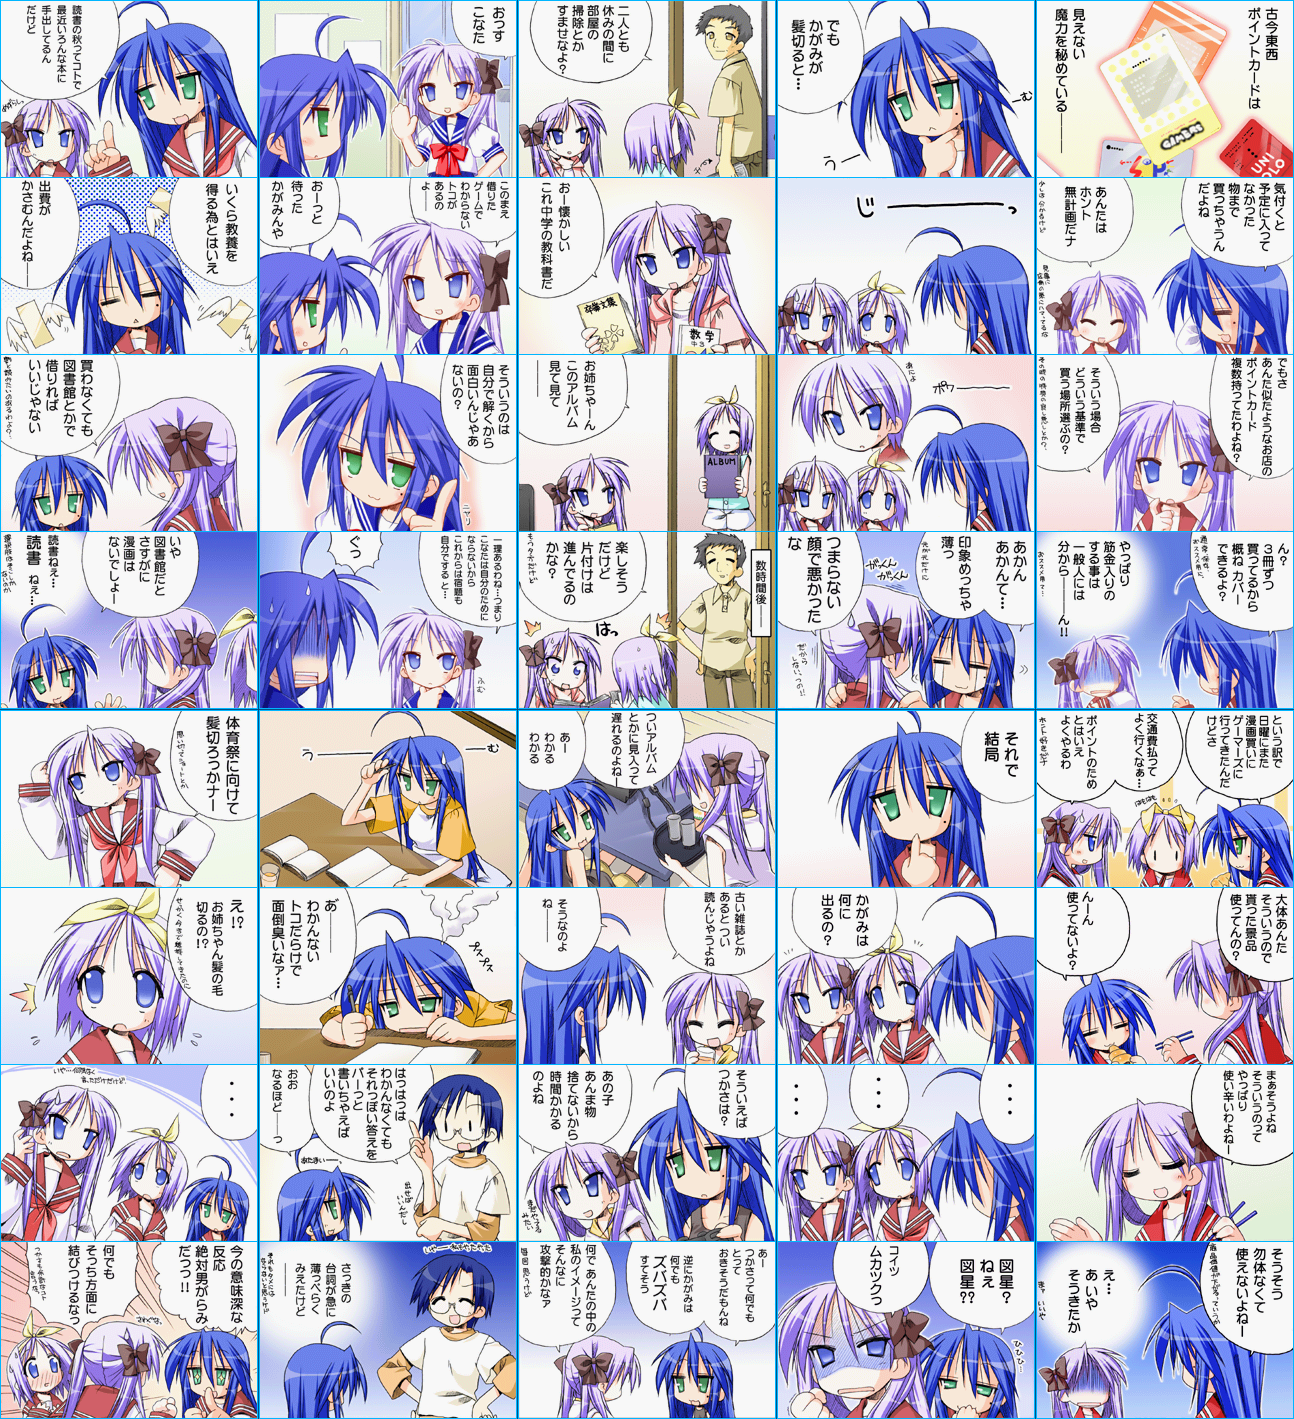 Lucky Star: Moe Drill - Unaltered Spot the Difference Panels